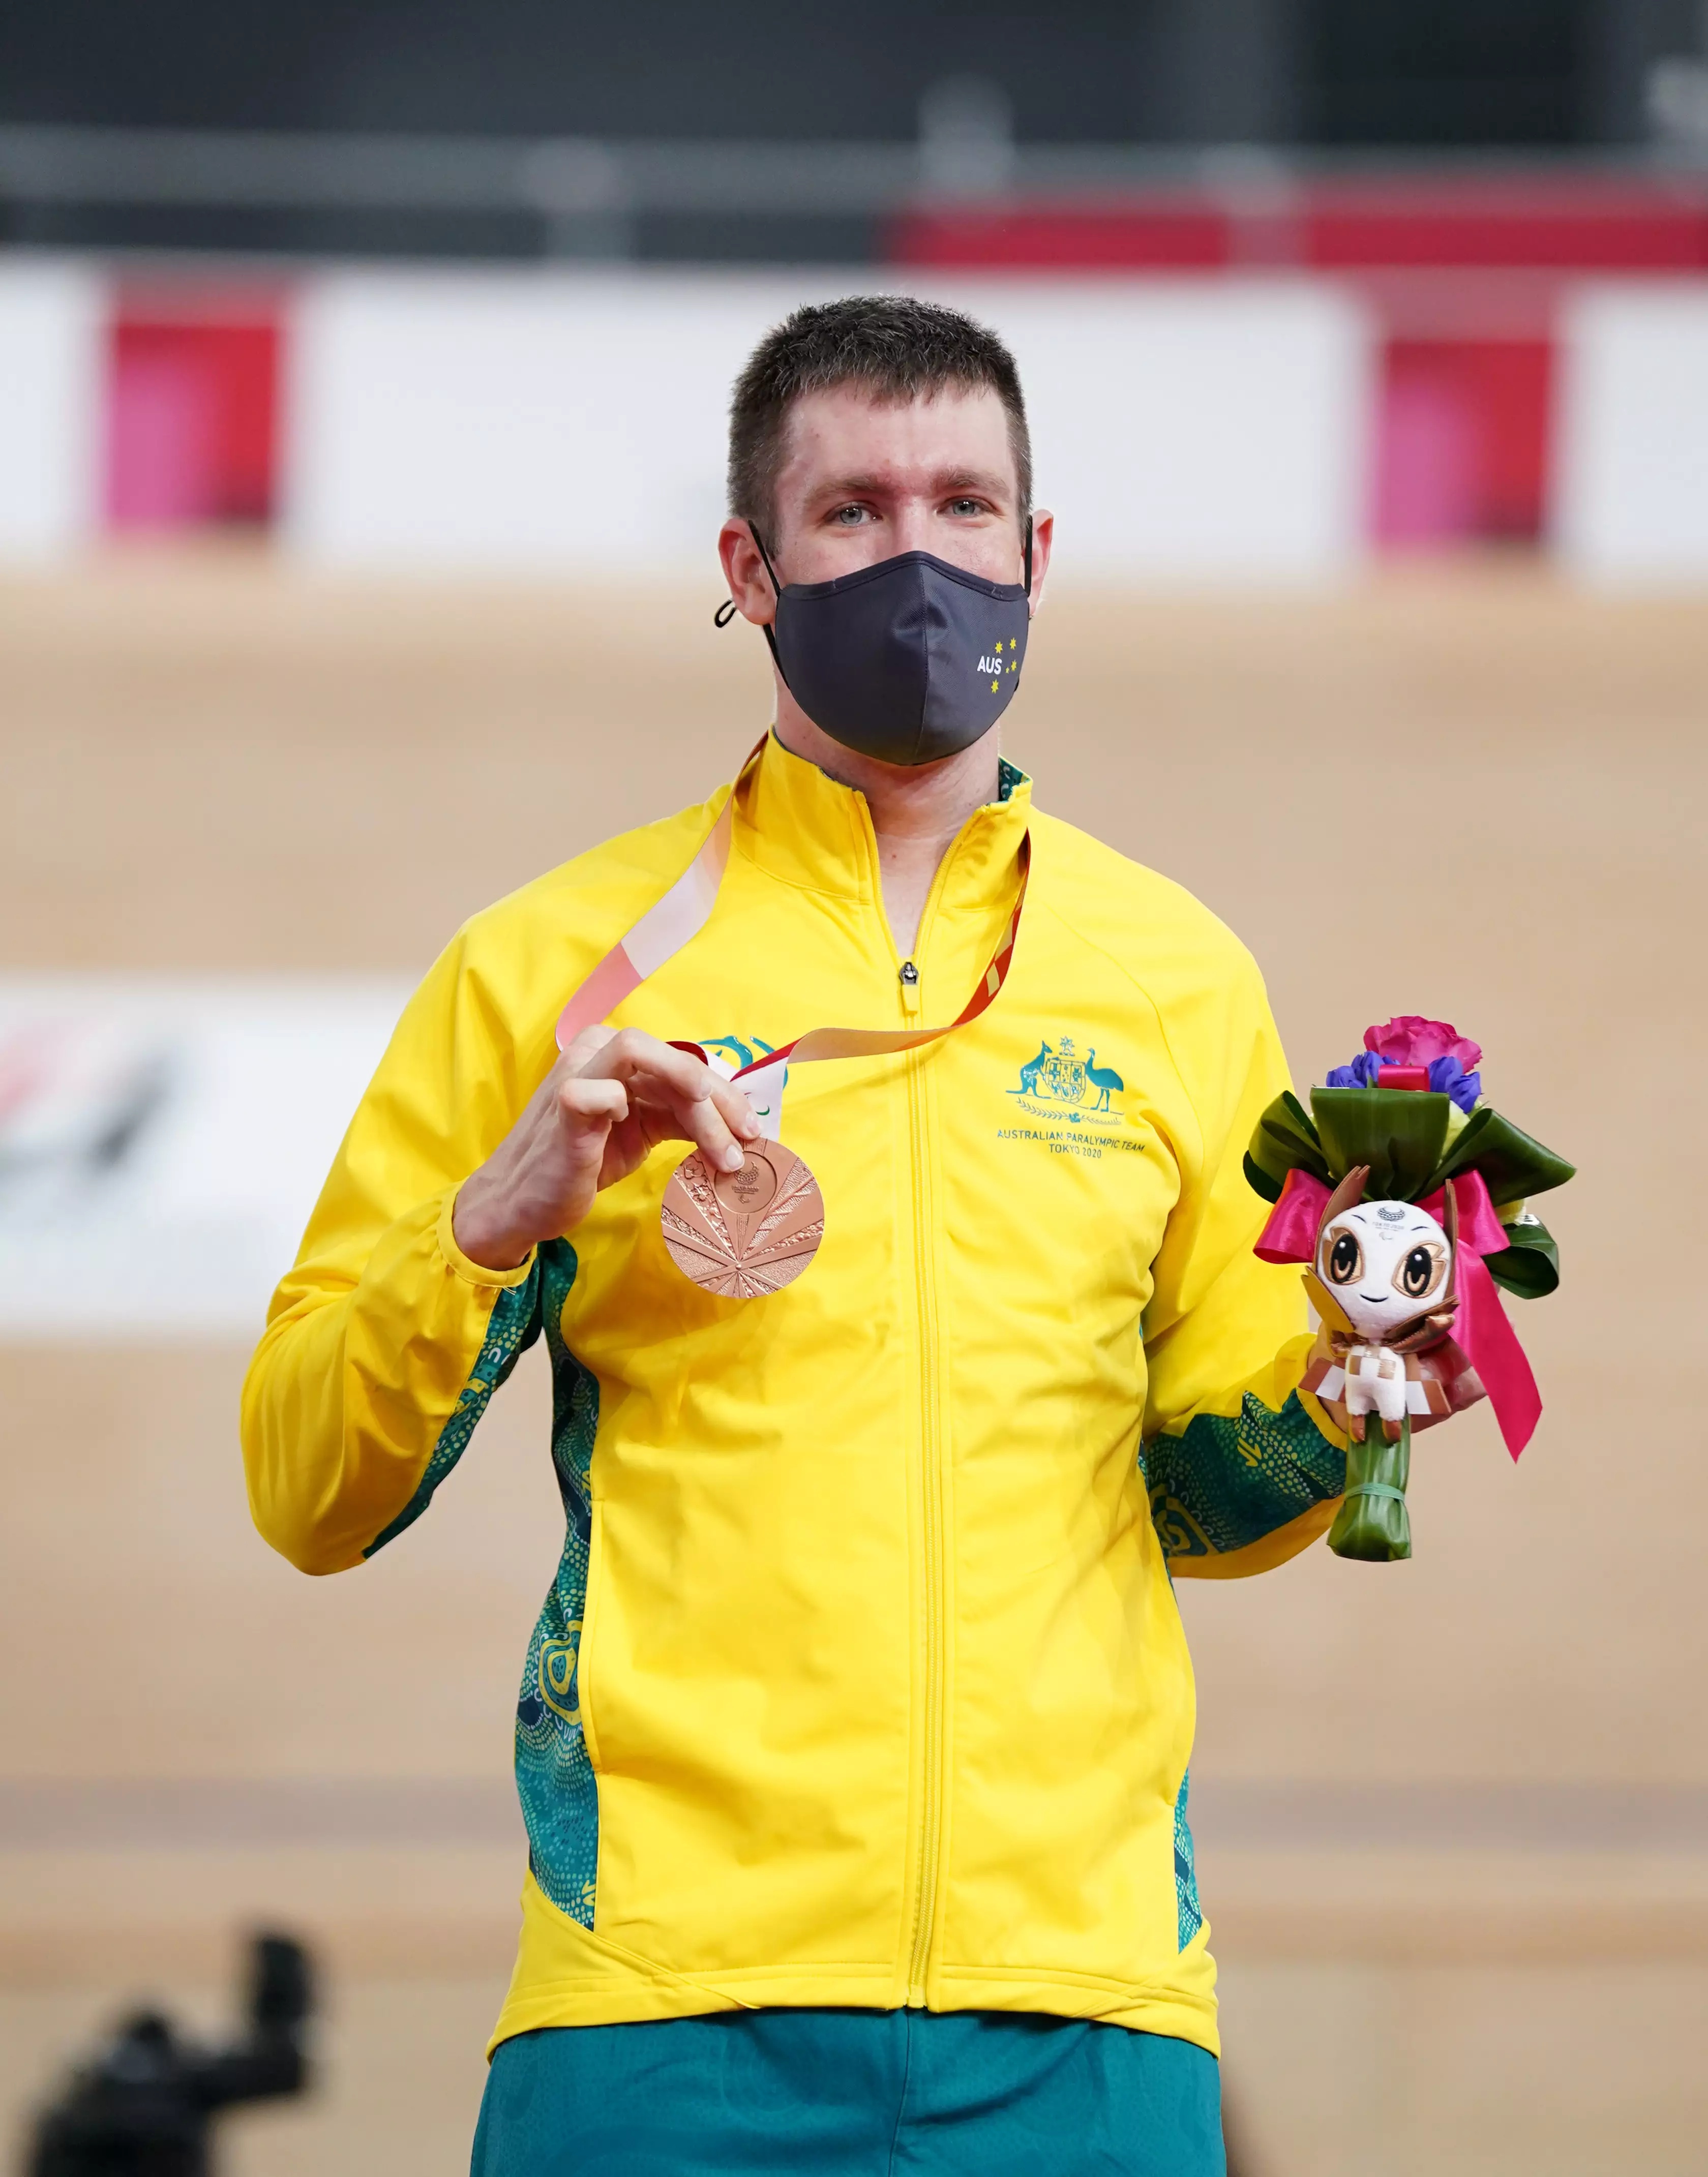 Australia's Darren Hicks celebrates with his silver medal after finishing second in the Men's C2 3000 metres Individual Pursuit.